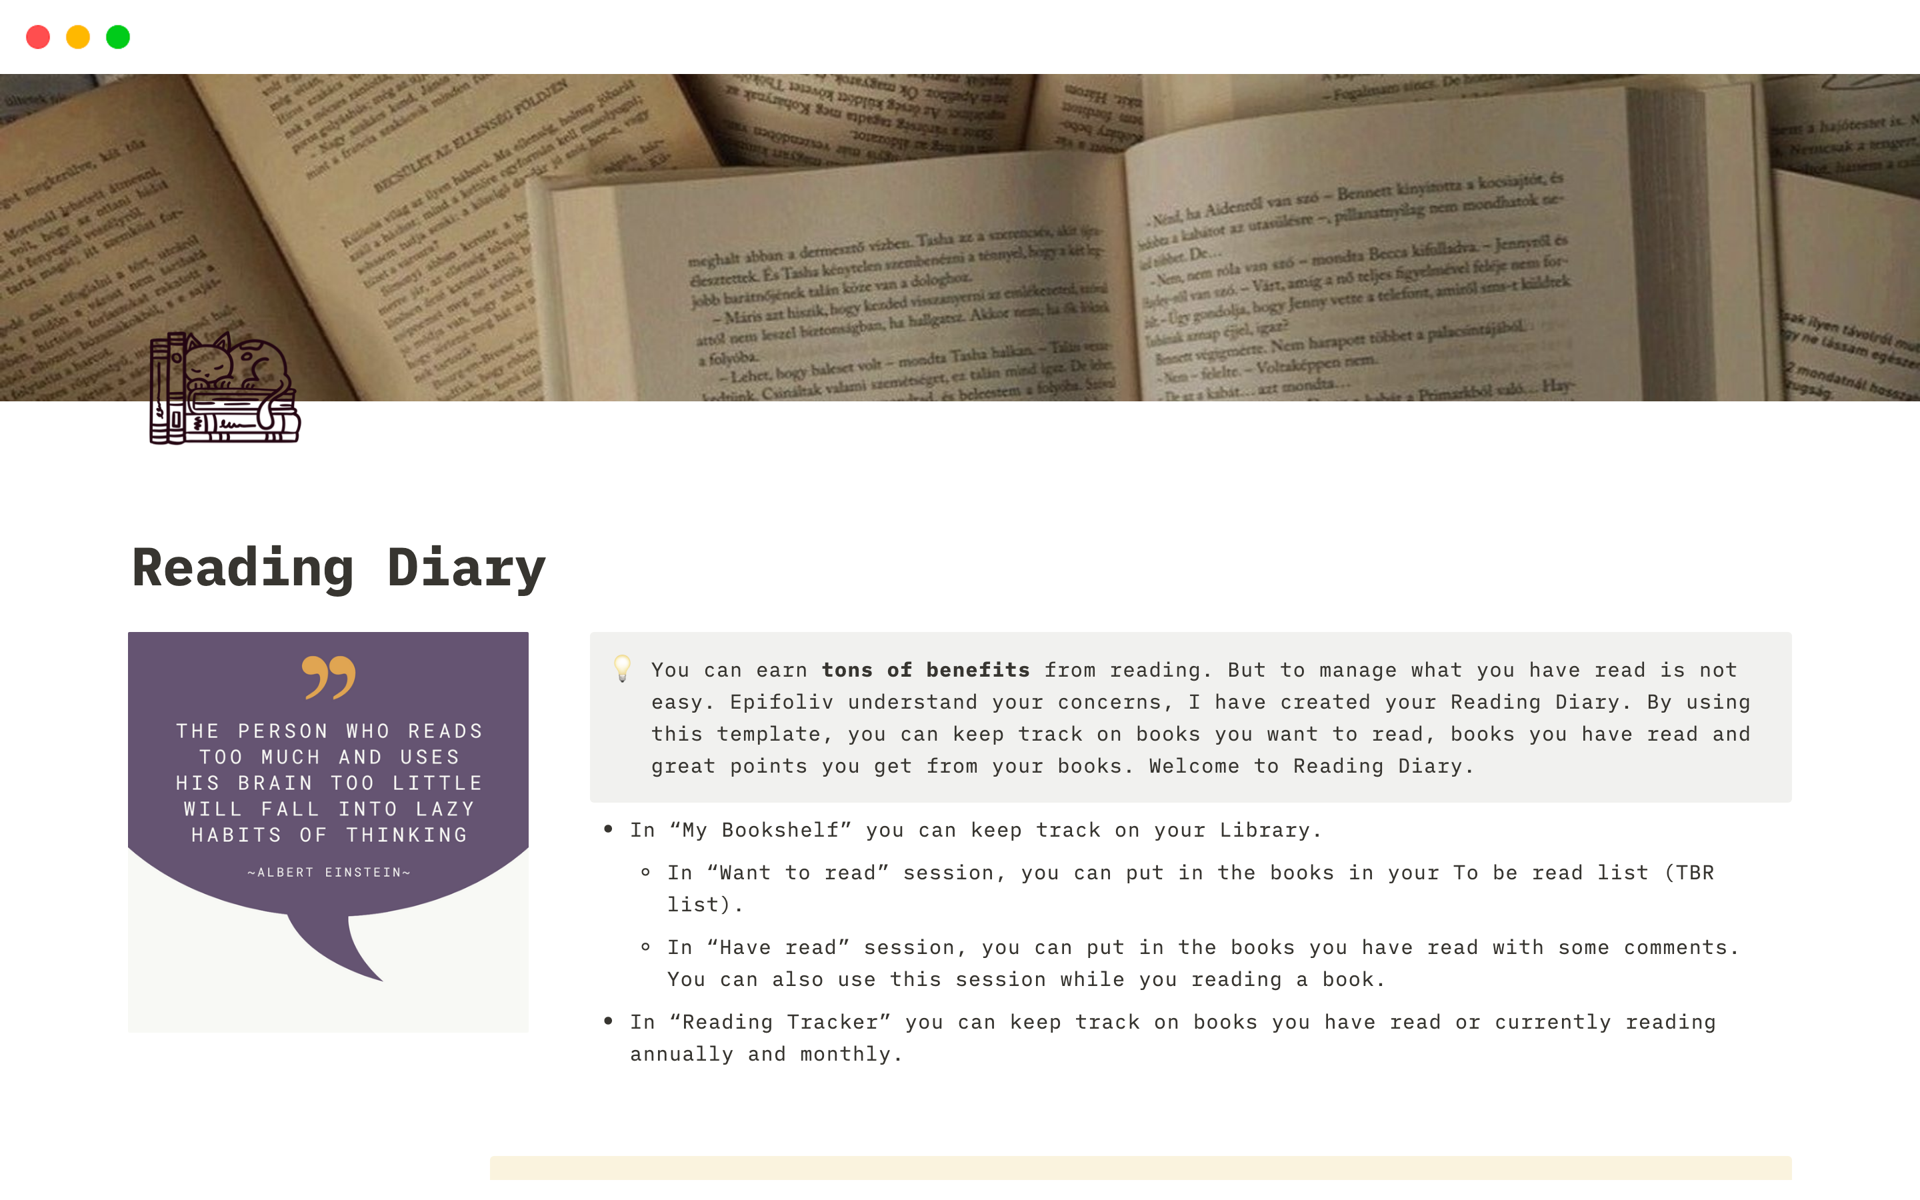 Reading Diary Template, which you can use to keep track your reading and also sum up what you read